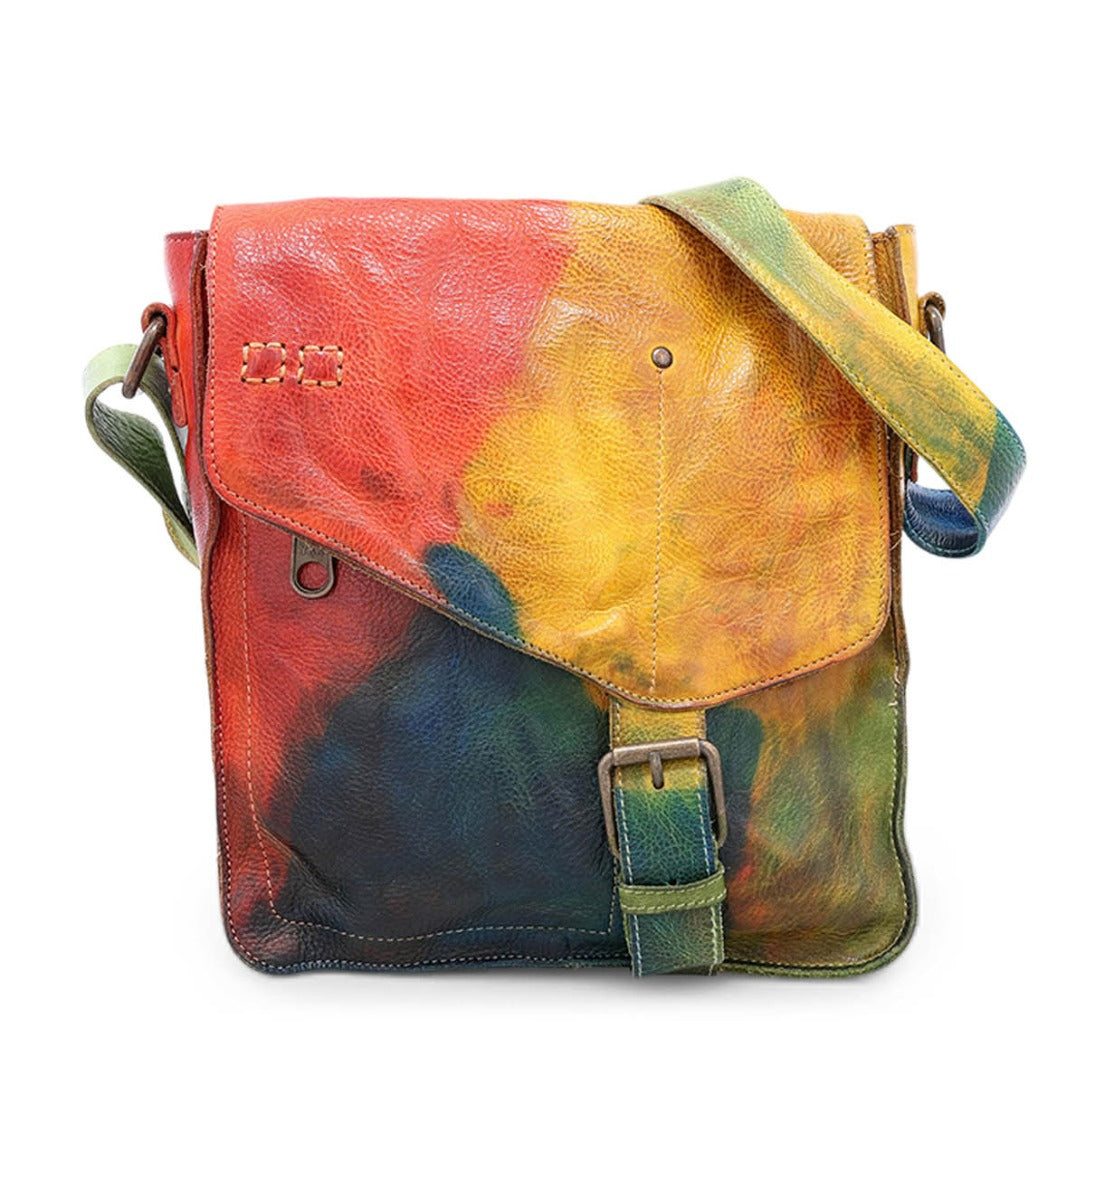 A colorful Venice Beach leather messenger bag with a strap from Bed Stu.